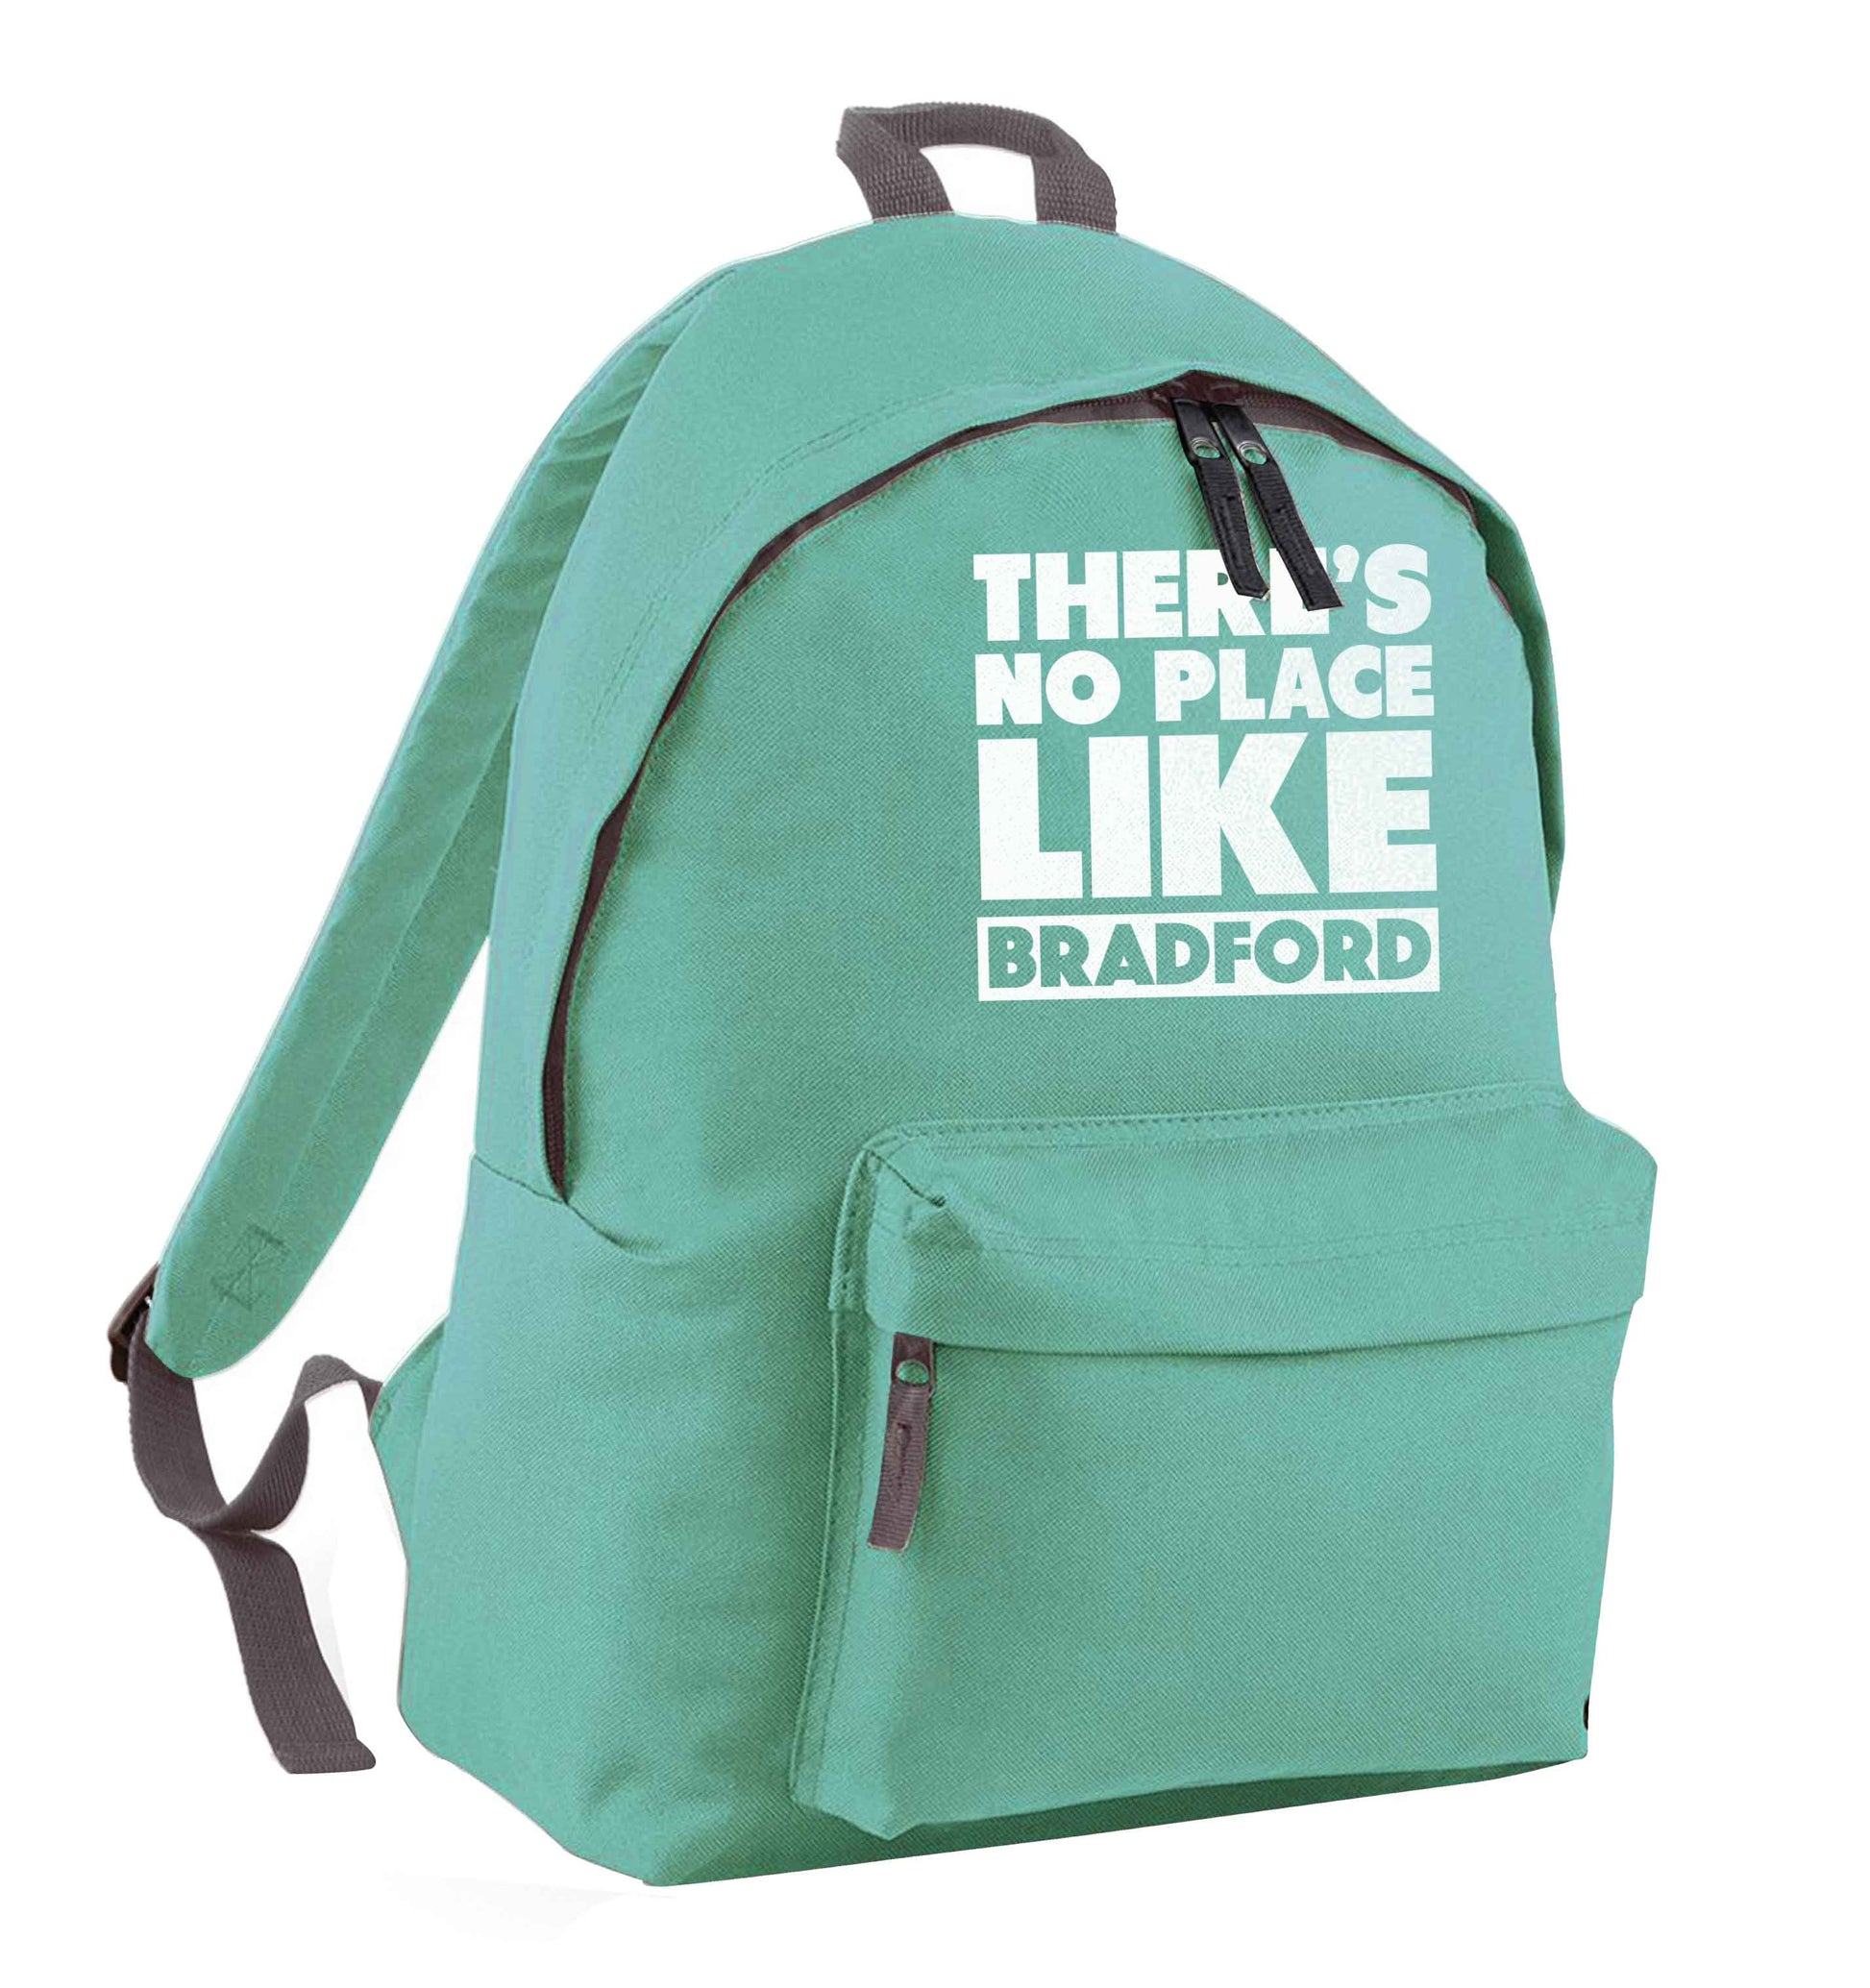 There's no place like Bradford mint adults backpack